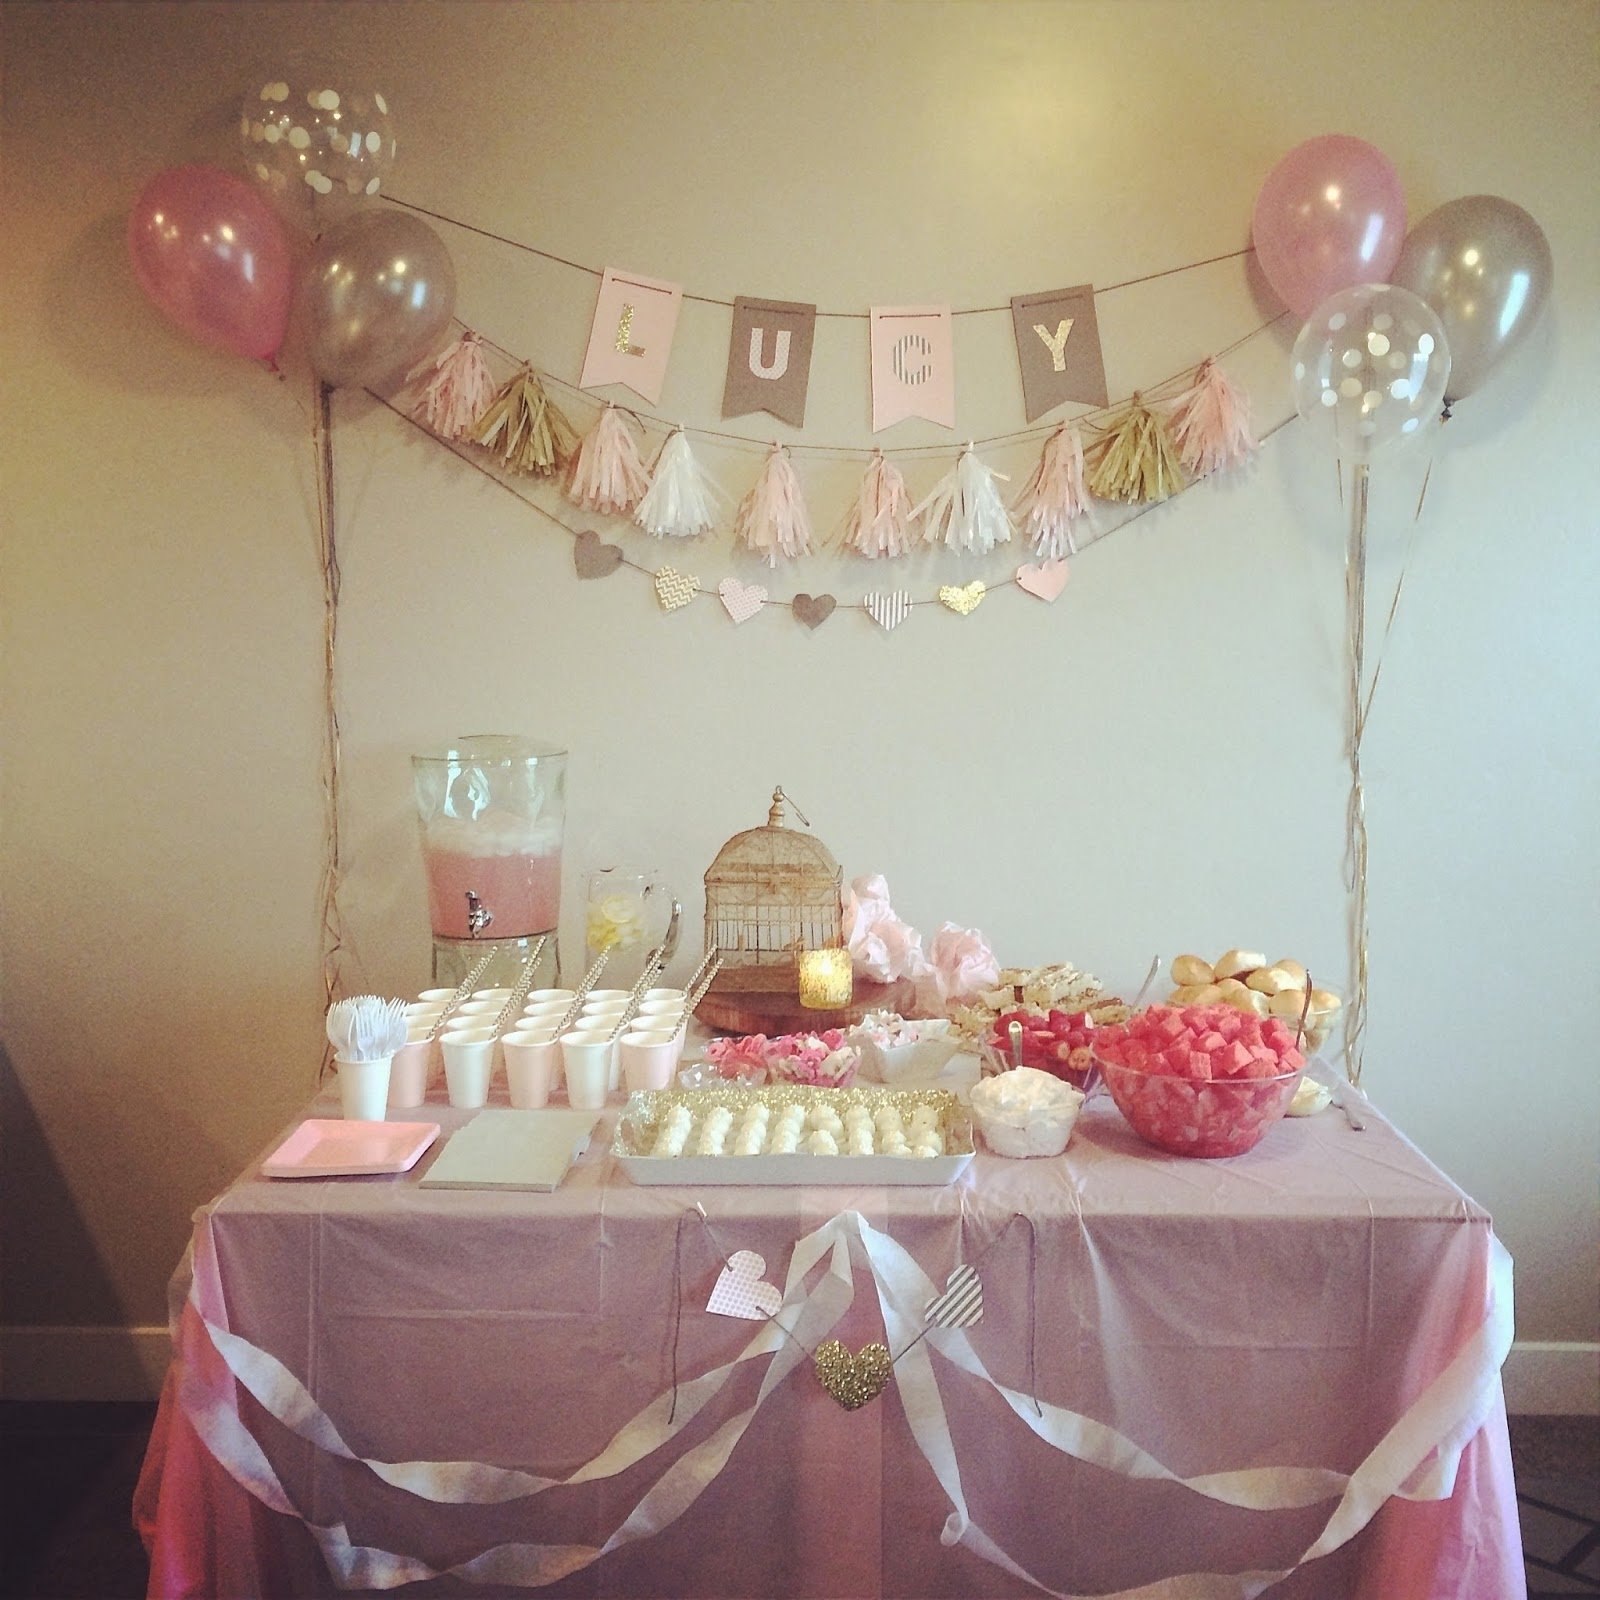 10 Attractive Baby Shower Ideas On A Budget baby shower on budget how to throw a baby shower for under 80 1 2022